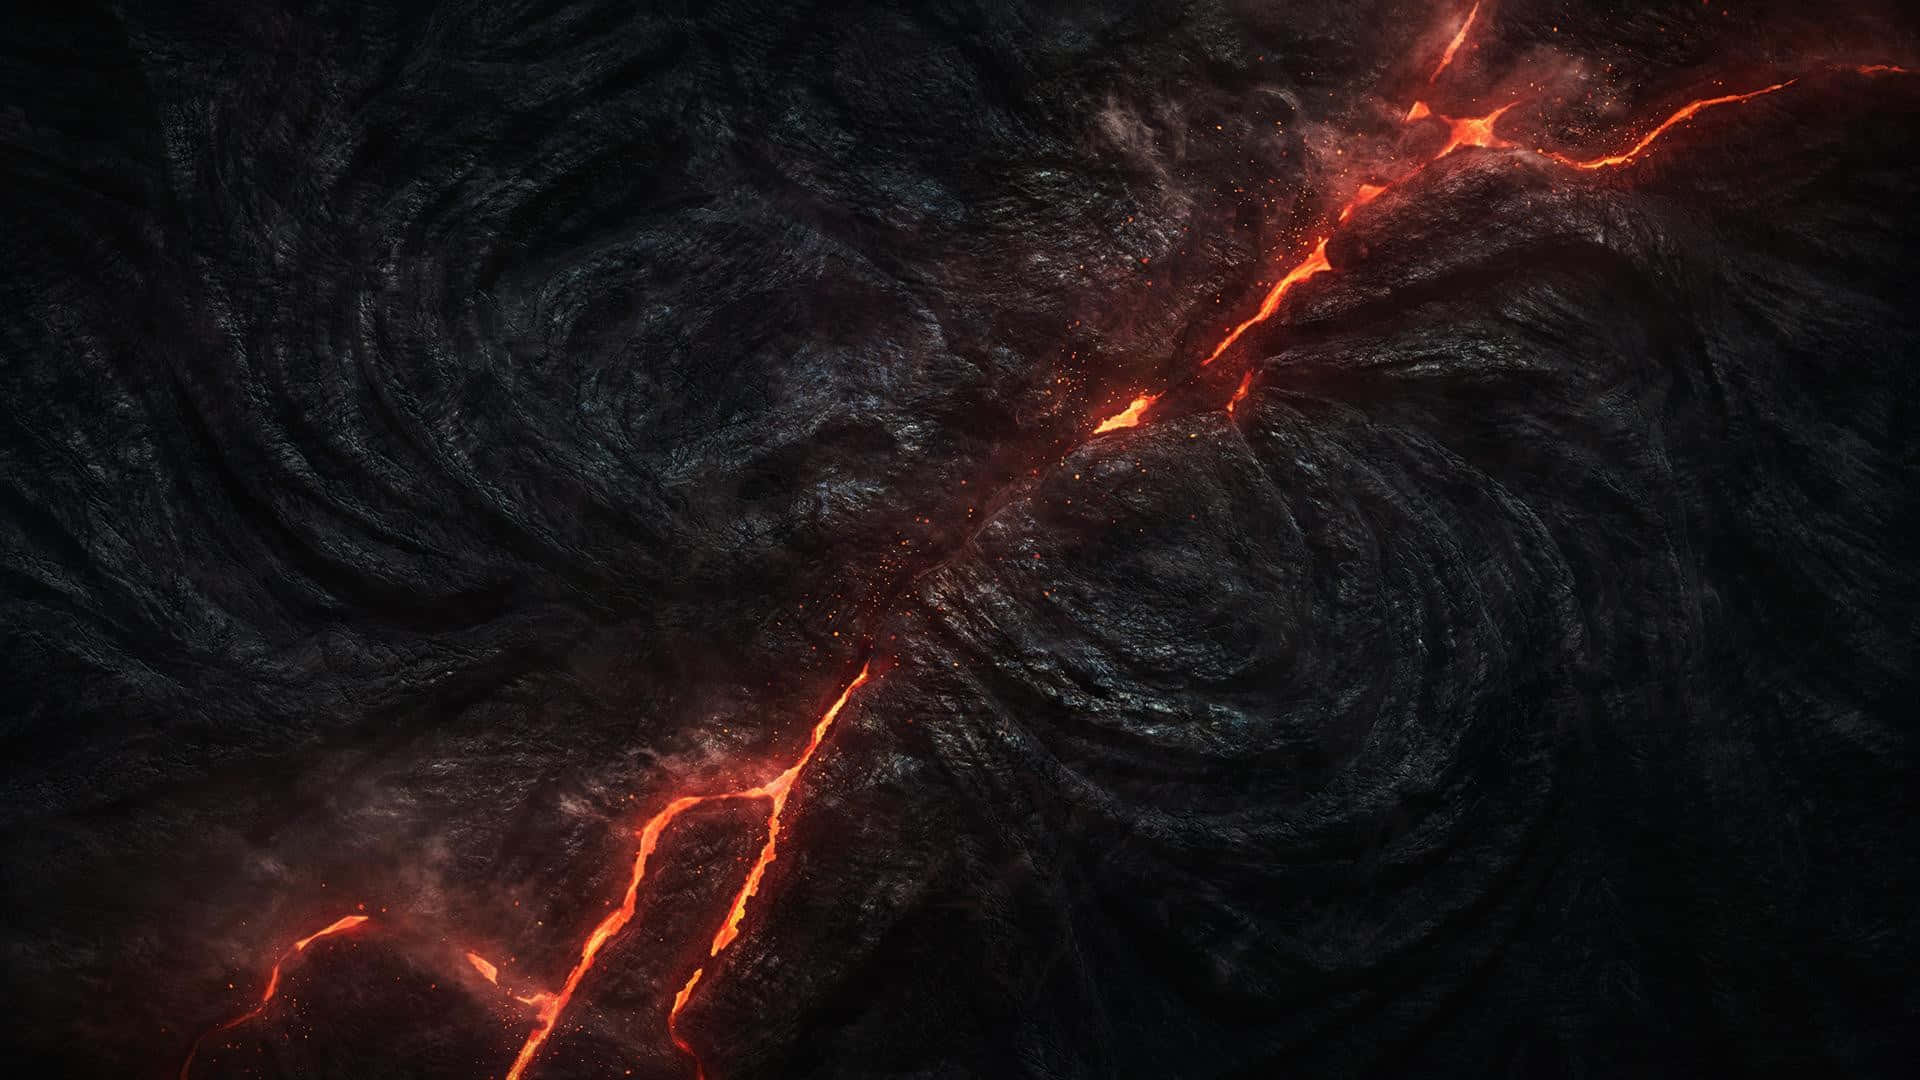 A Dark Background With Lava Flowing Through It